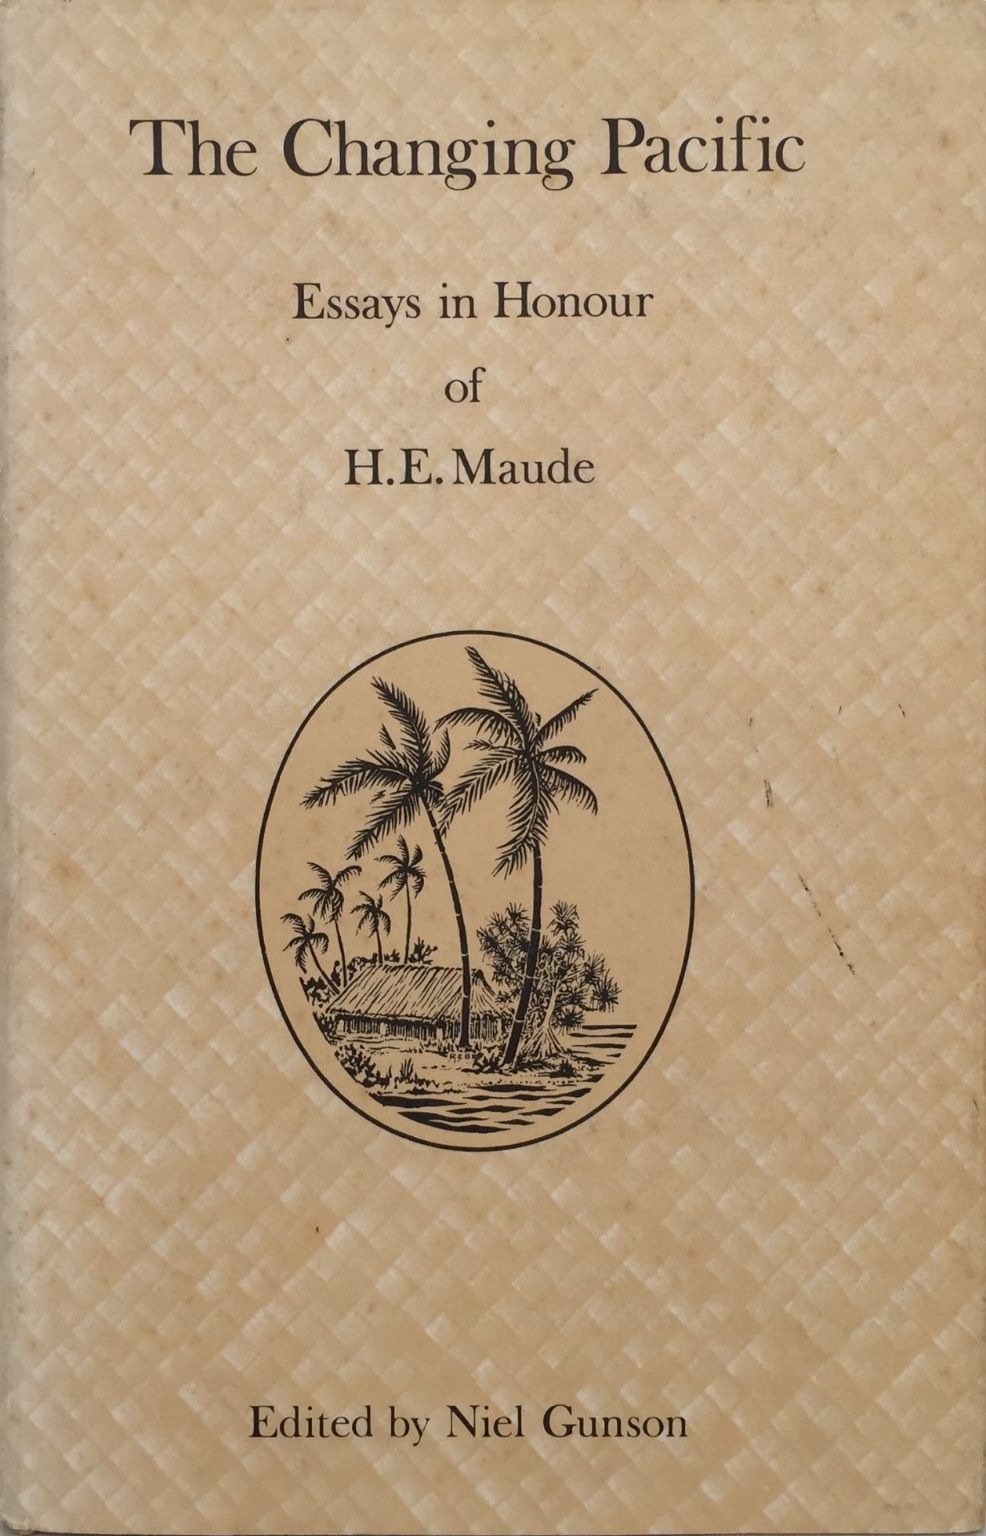 THE CHANGING PACIFIC: Essays In Honour of H.E. Maude